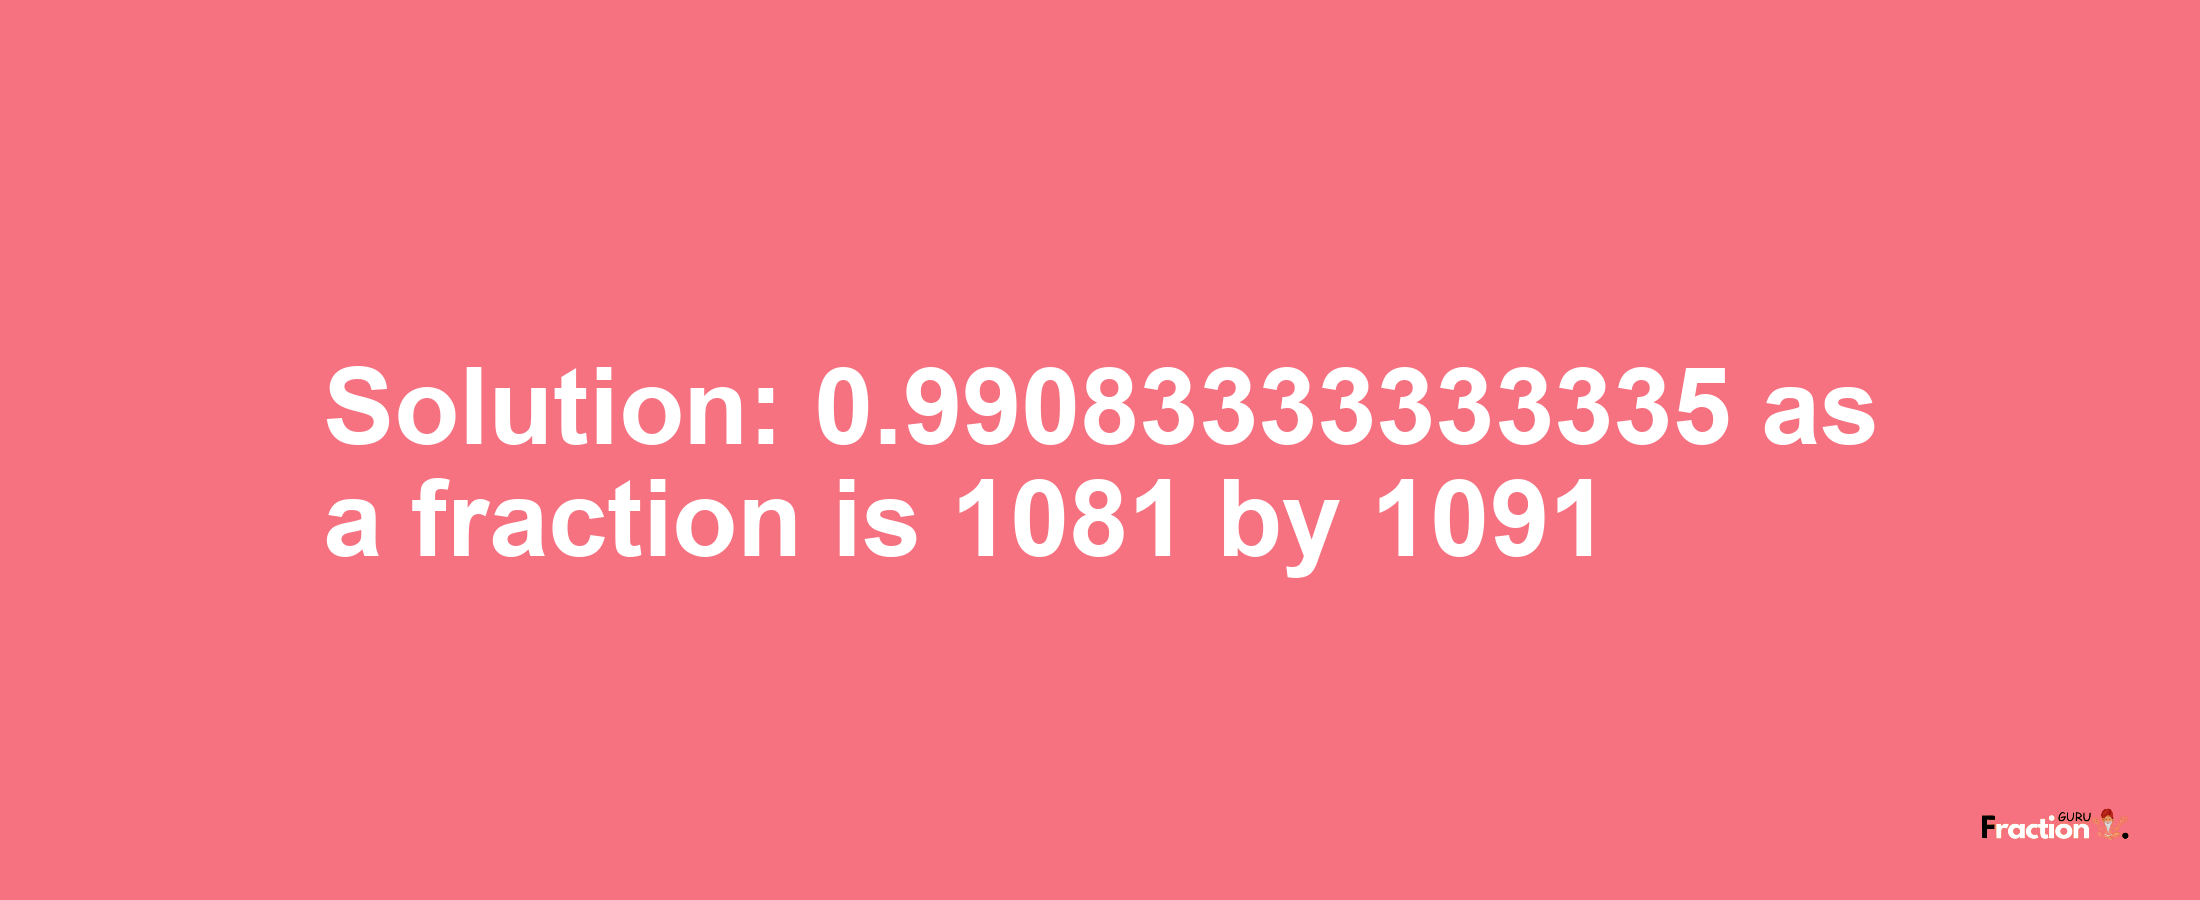 Solution:0.99083333333335 as a fraction is 1081/1091